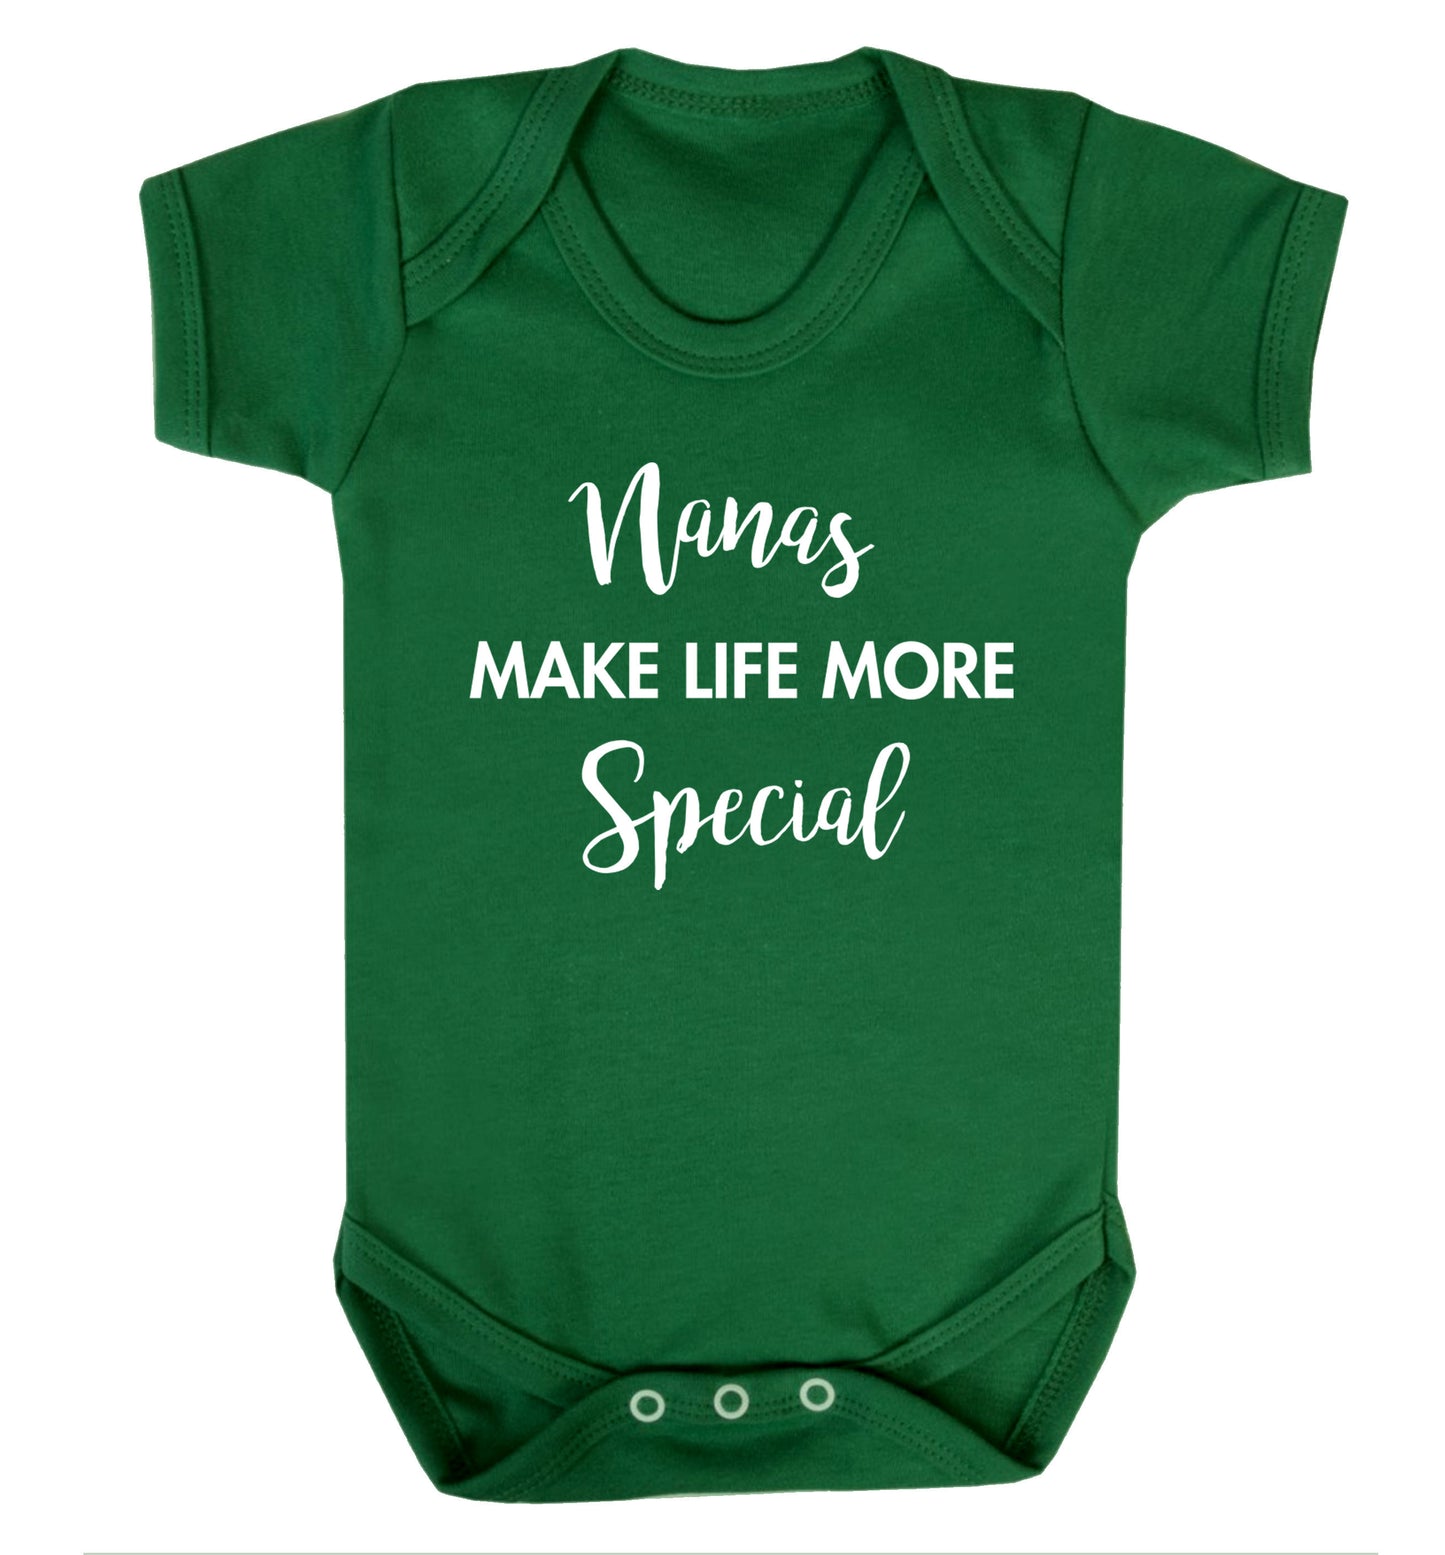 Nanas make life more special Baby Vest green 18-24 months